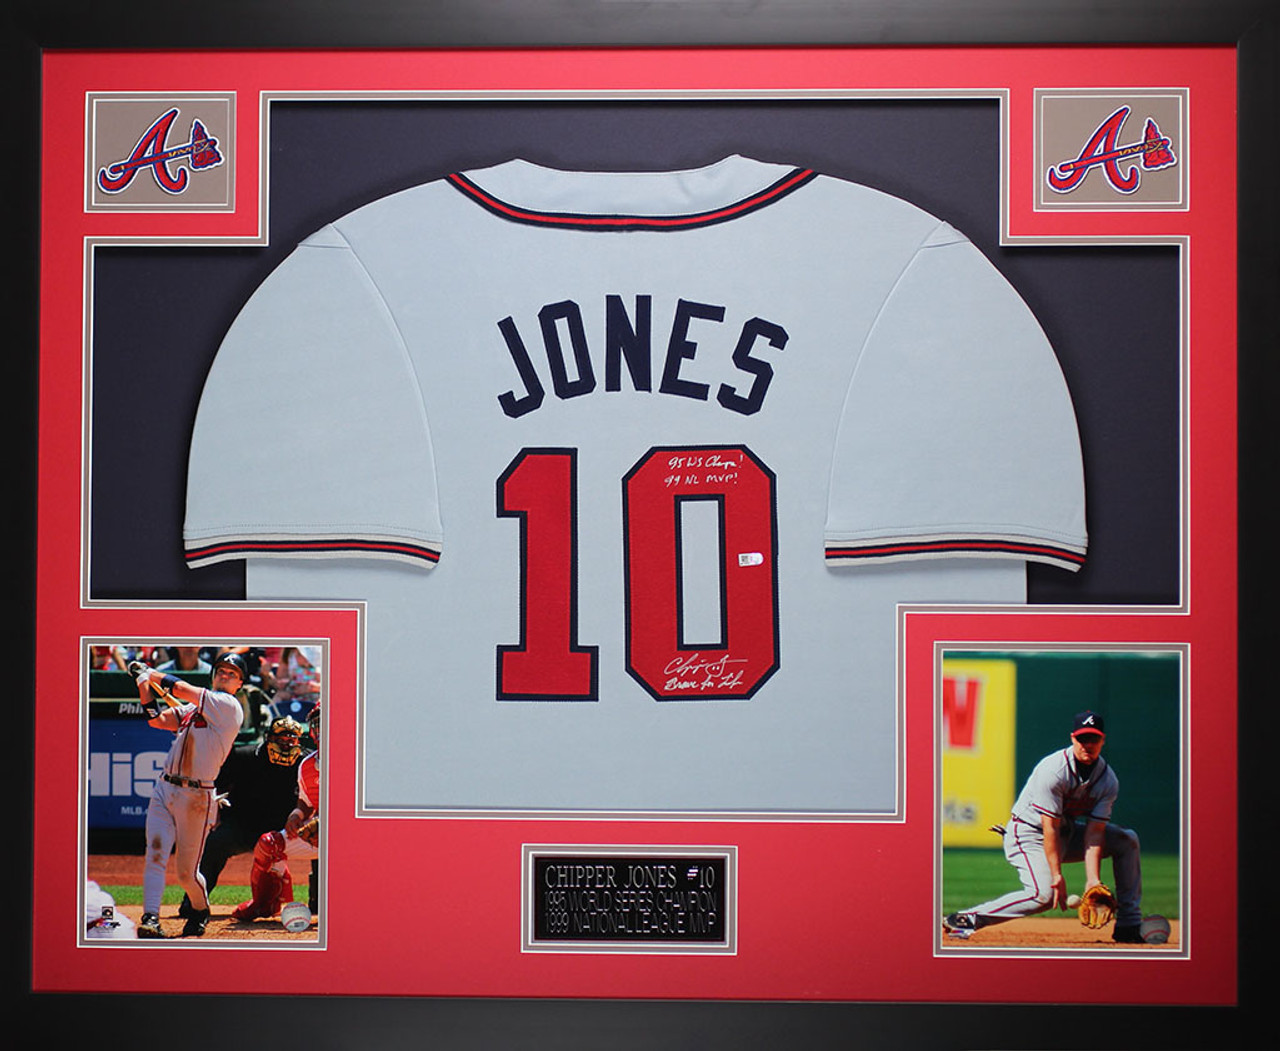 Chipper Jones Autographed and Framed Gray Braves Jersey